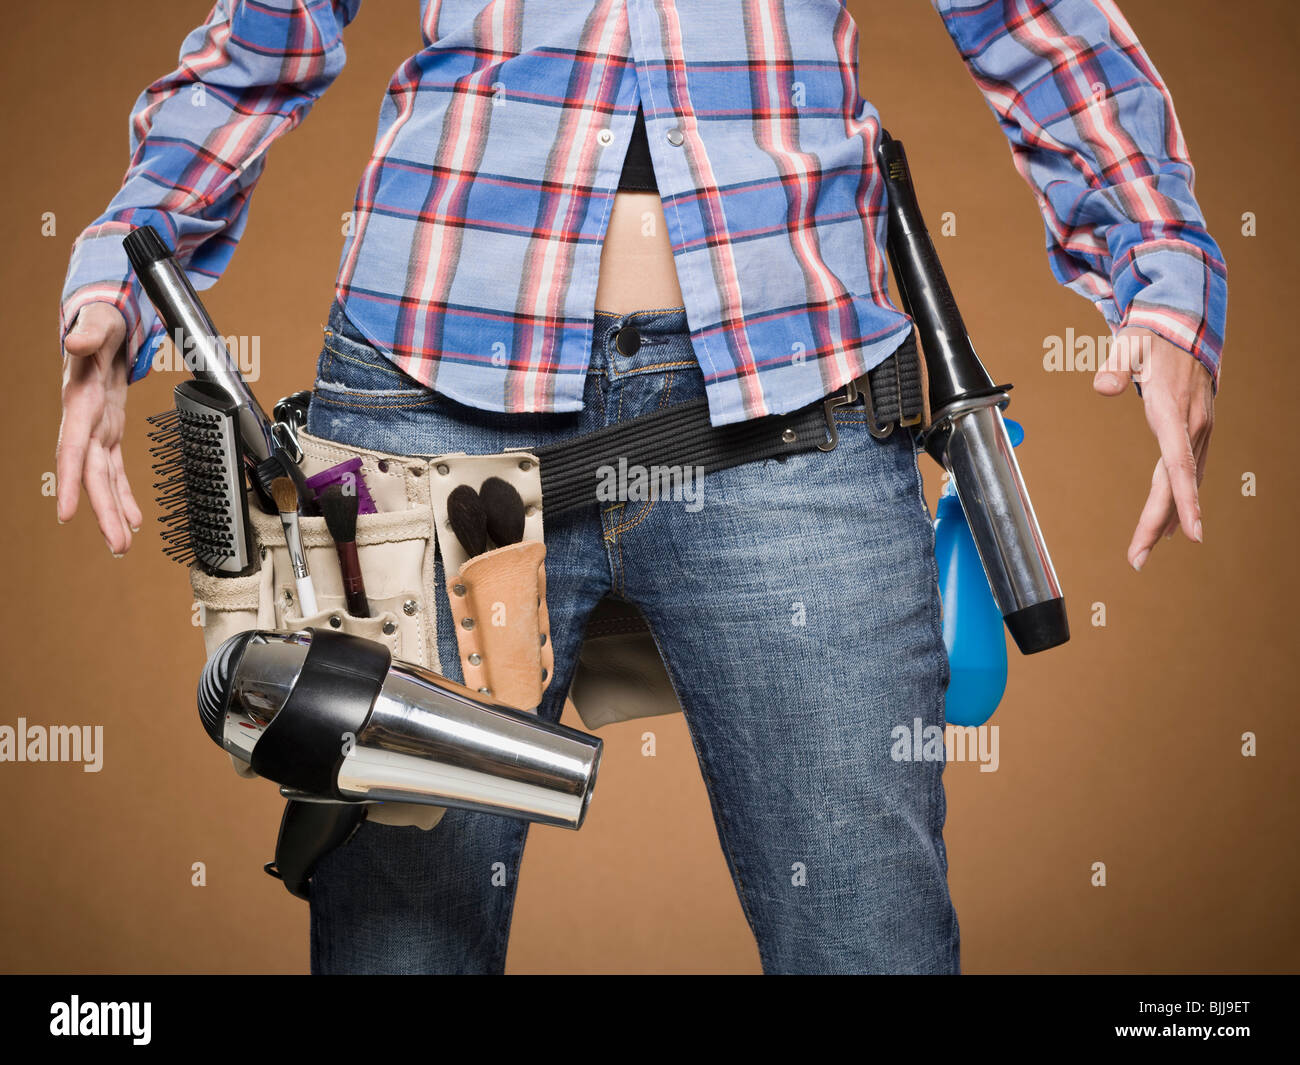 Mid section view of hairdresser with tool belt Stock Photo